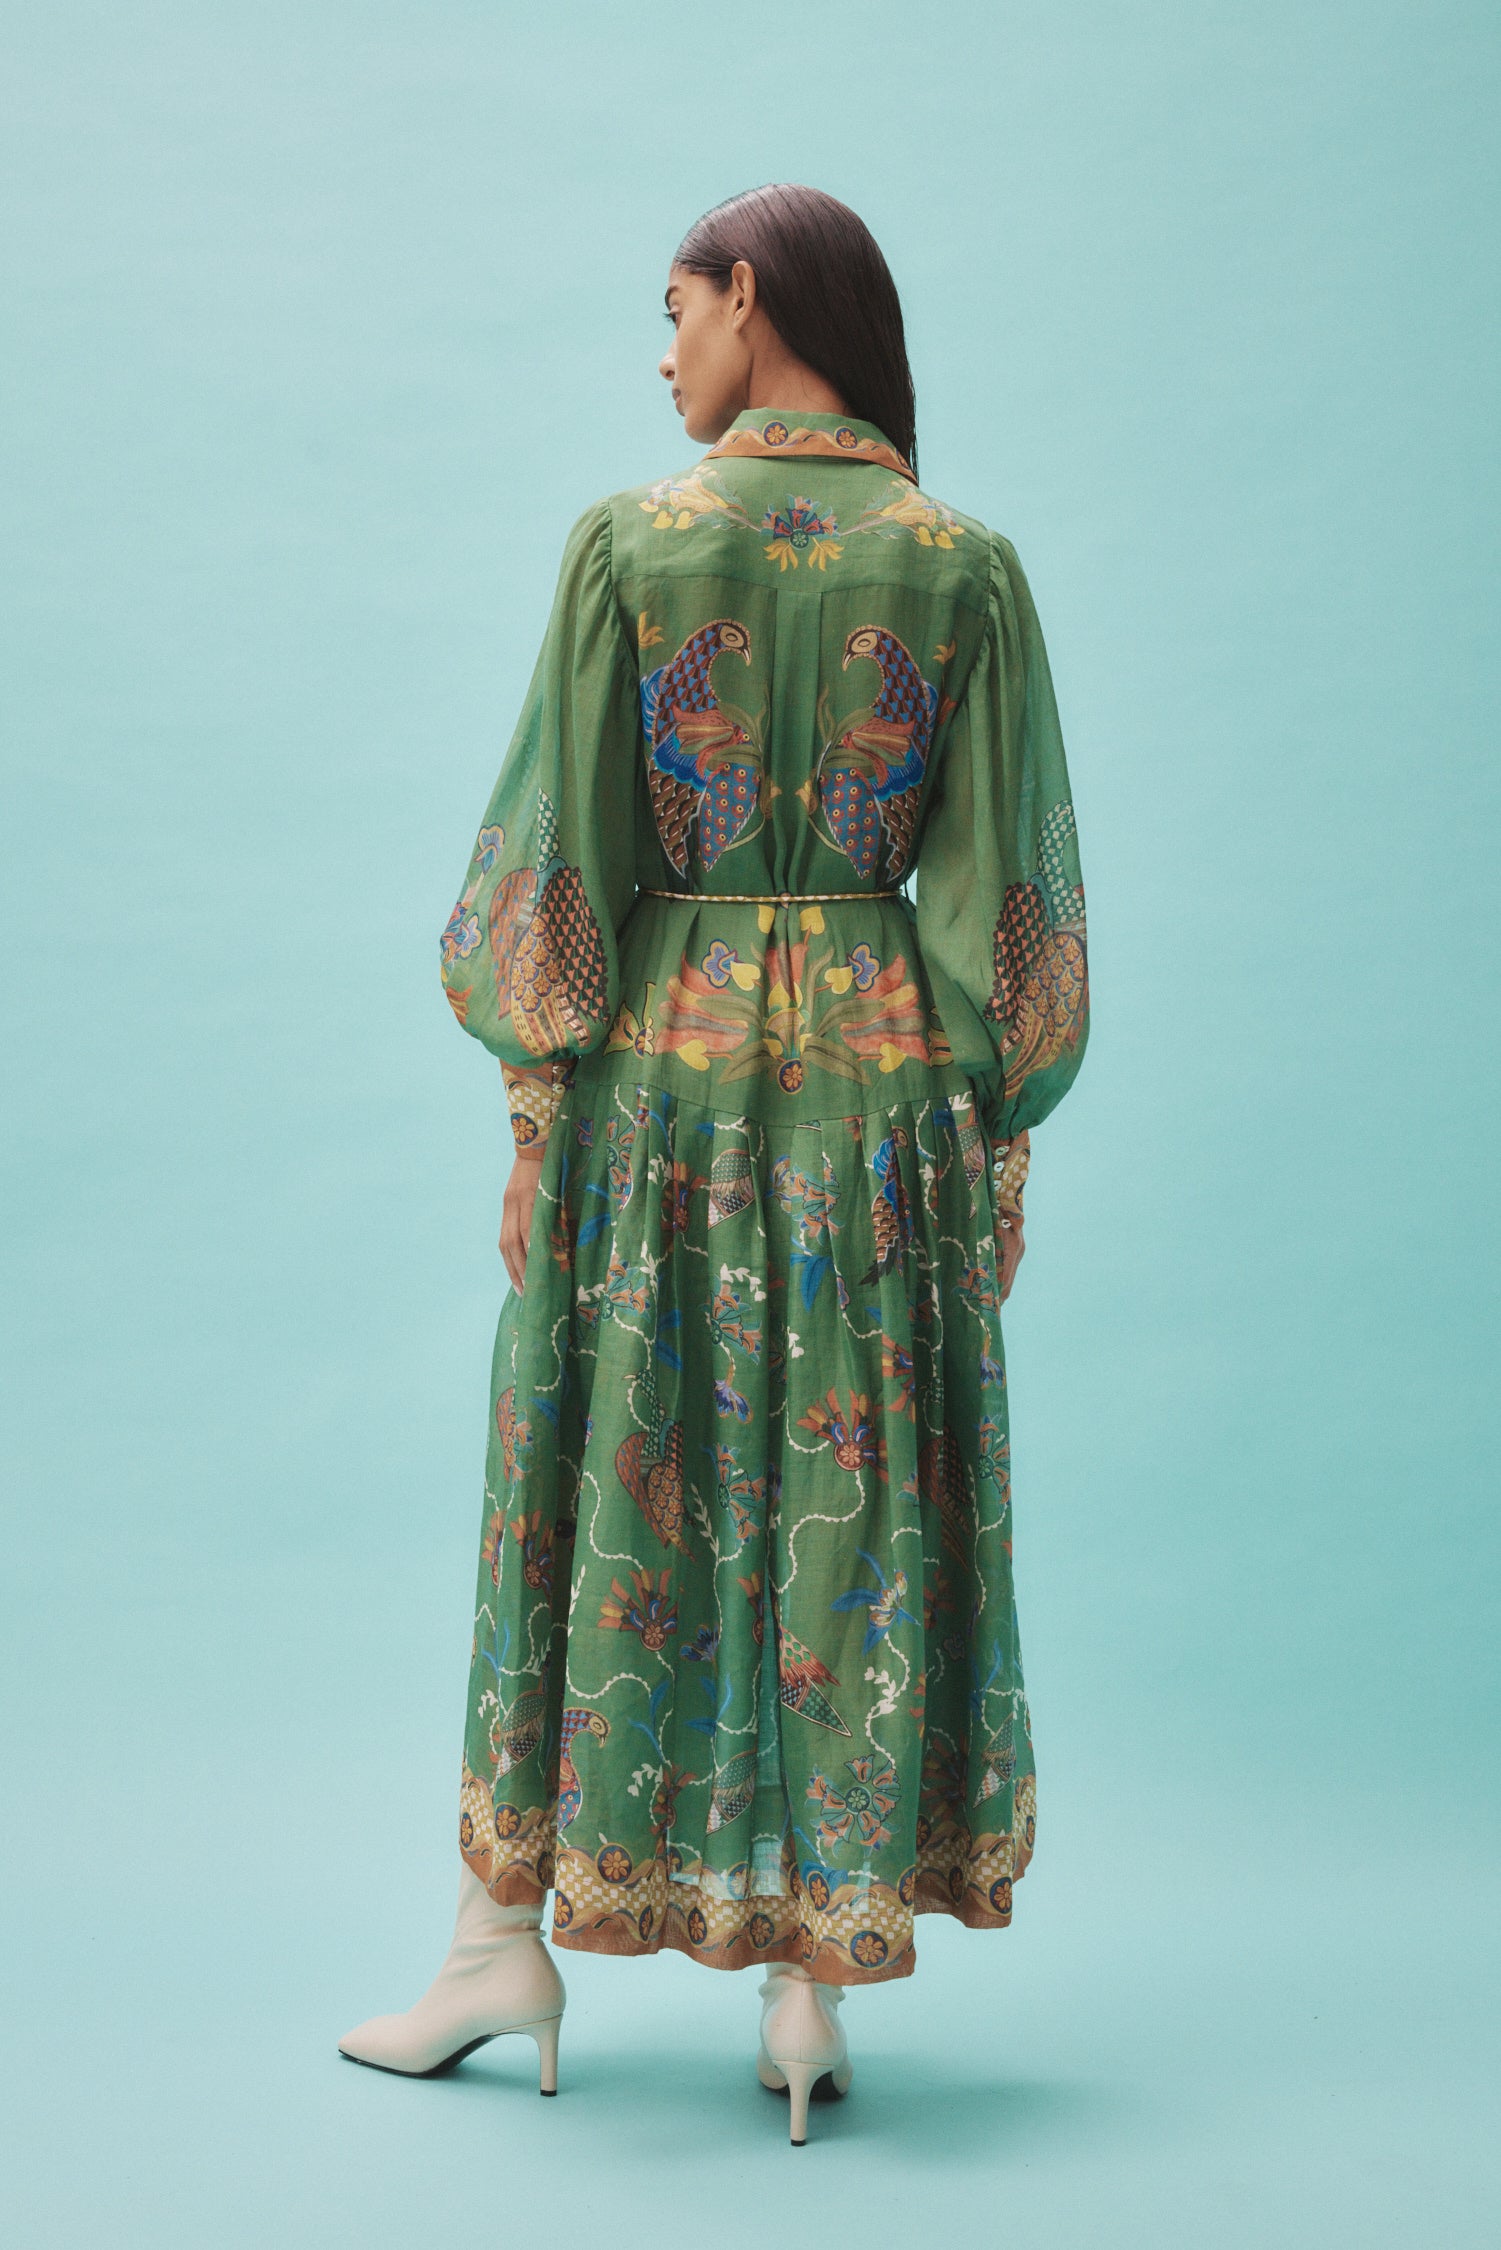 Alemais Birdie Shirtdress in Jade available at TNT The New Trend Australia.